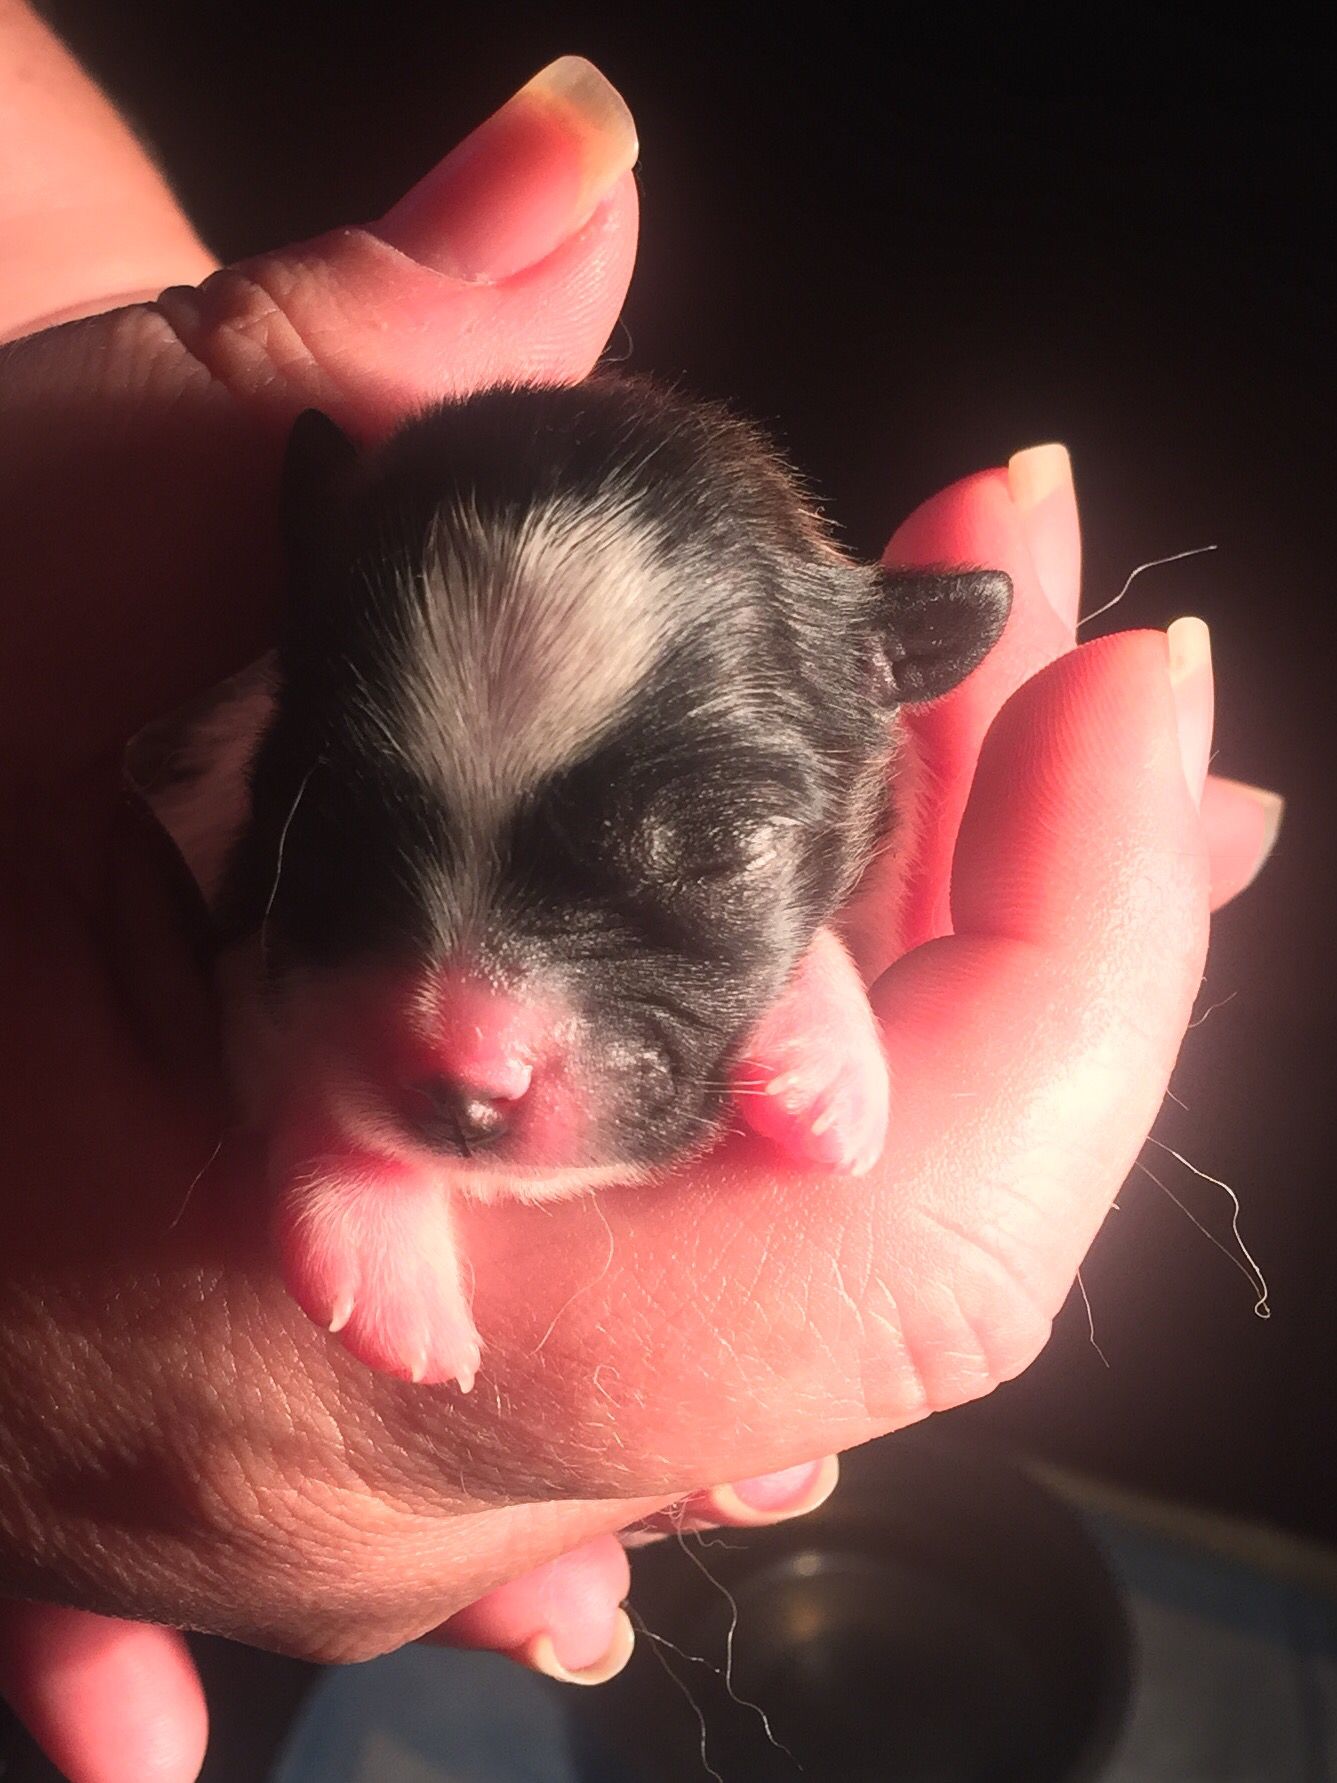 Baby Teacup Shipom born today #puppies #love #cuteness | My Pets ...